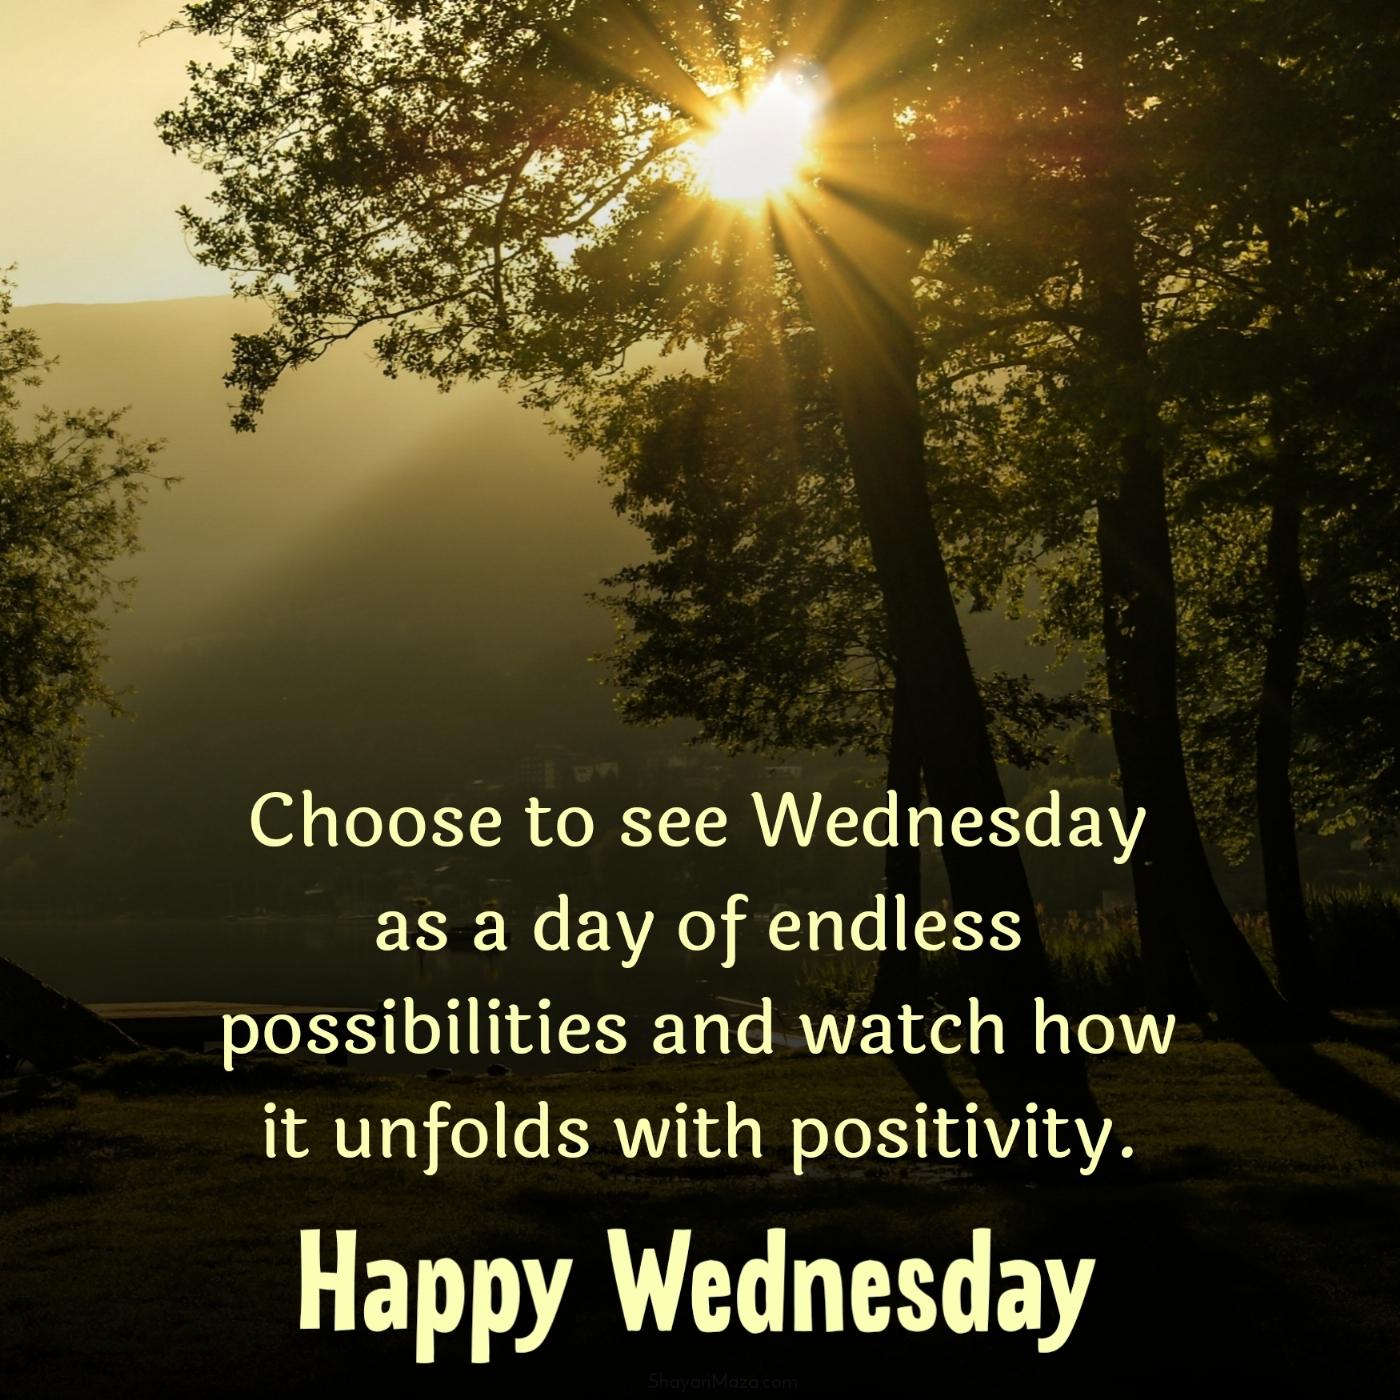 Choose to see Wednesday as a day of endless possibilities